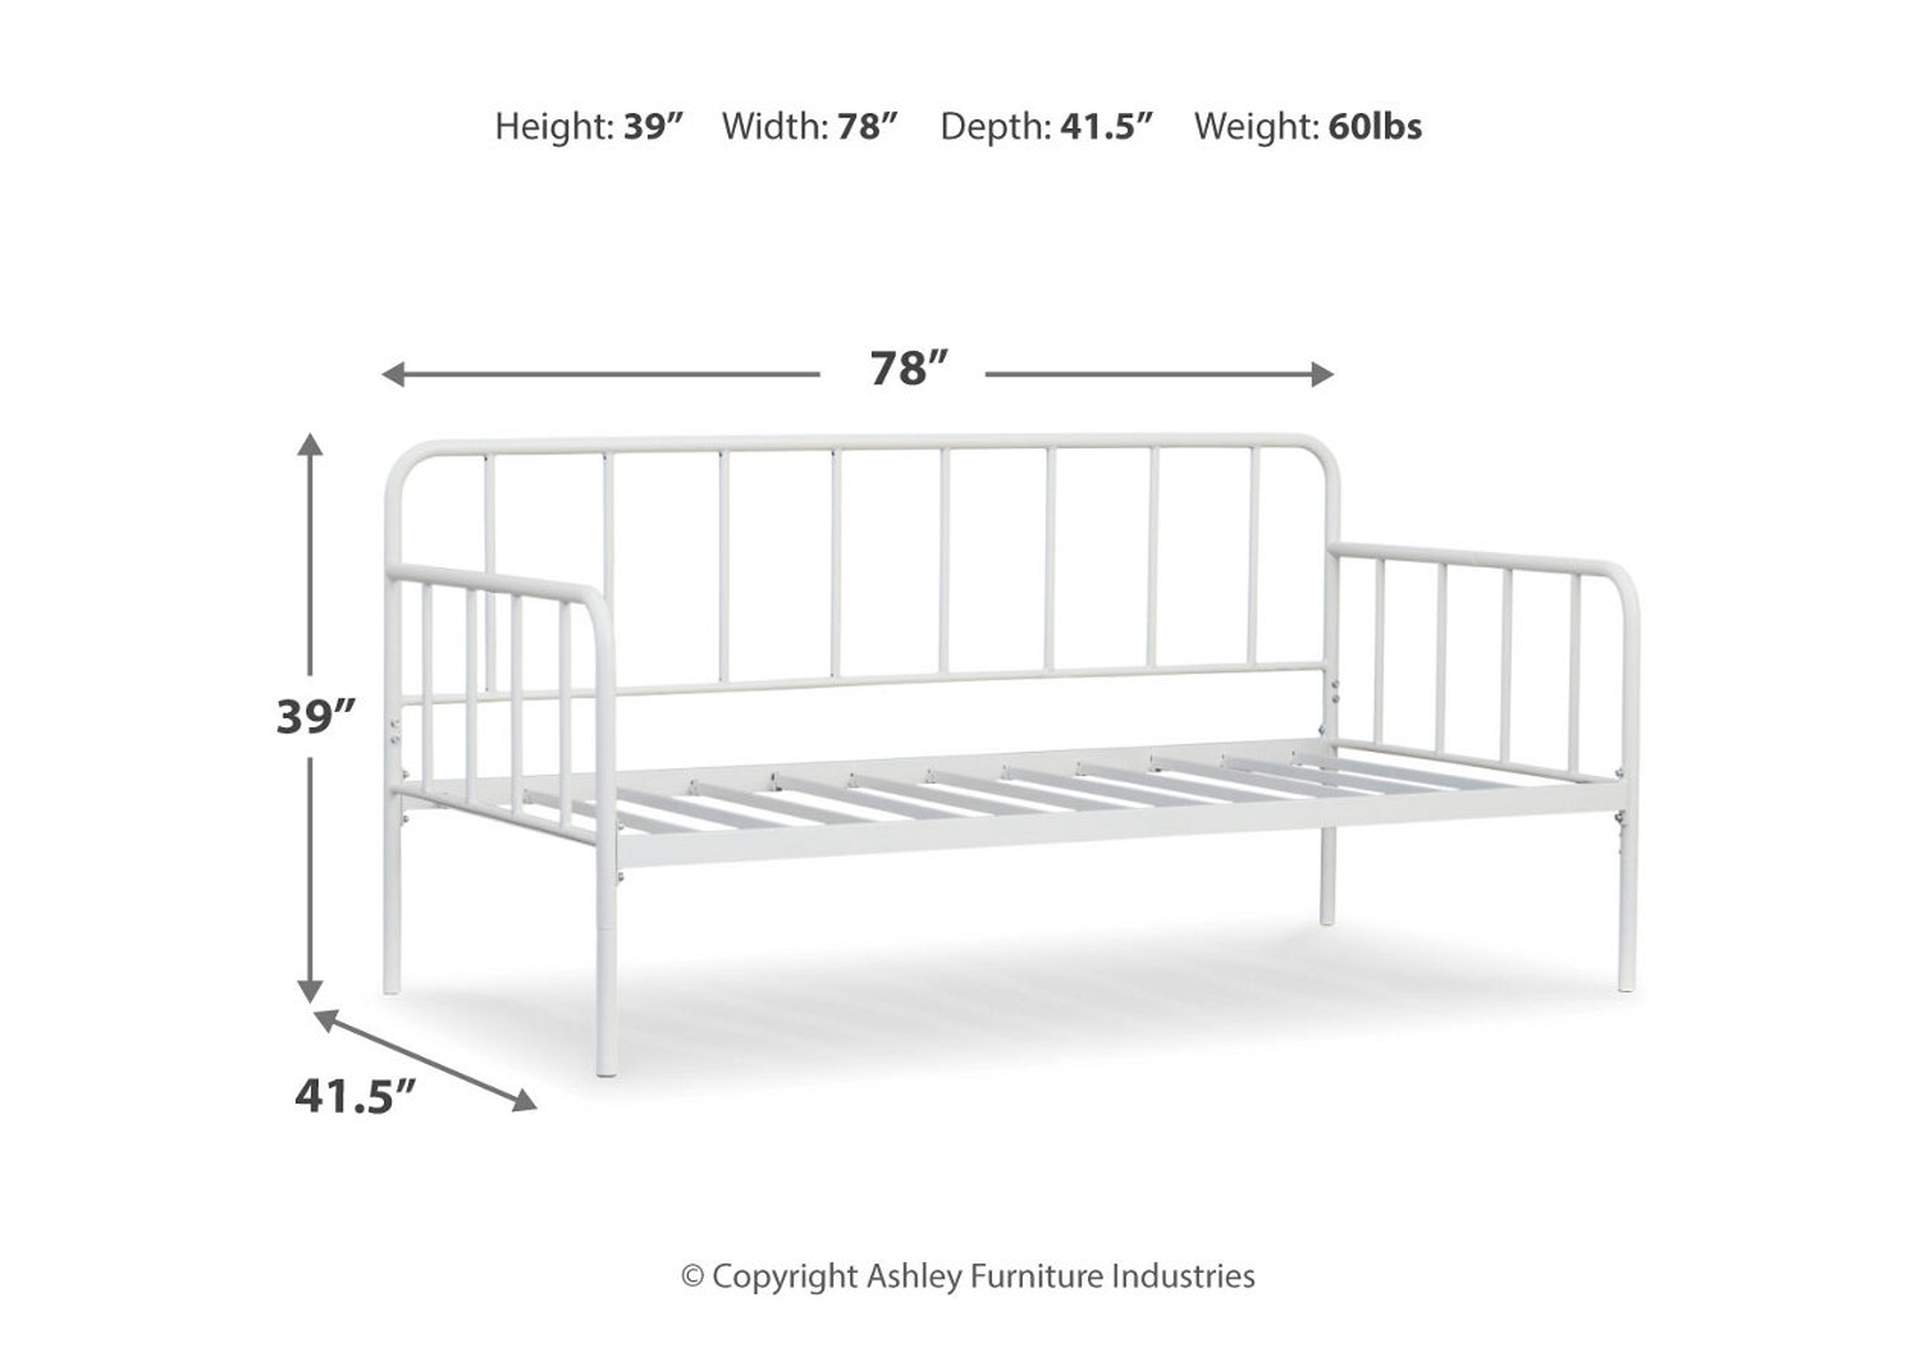 Trentlore Twin Metal Day Bed with Platform,Signature Design By Ashley